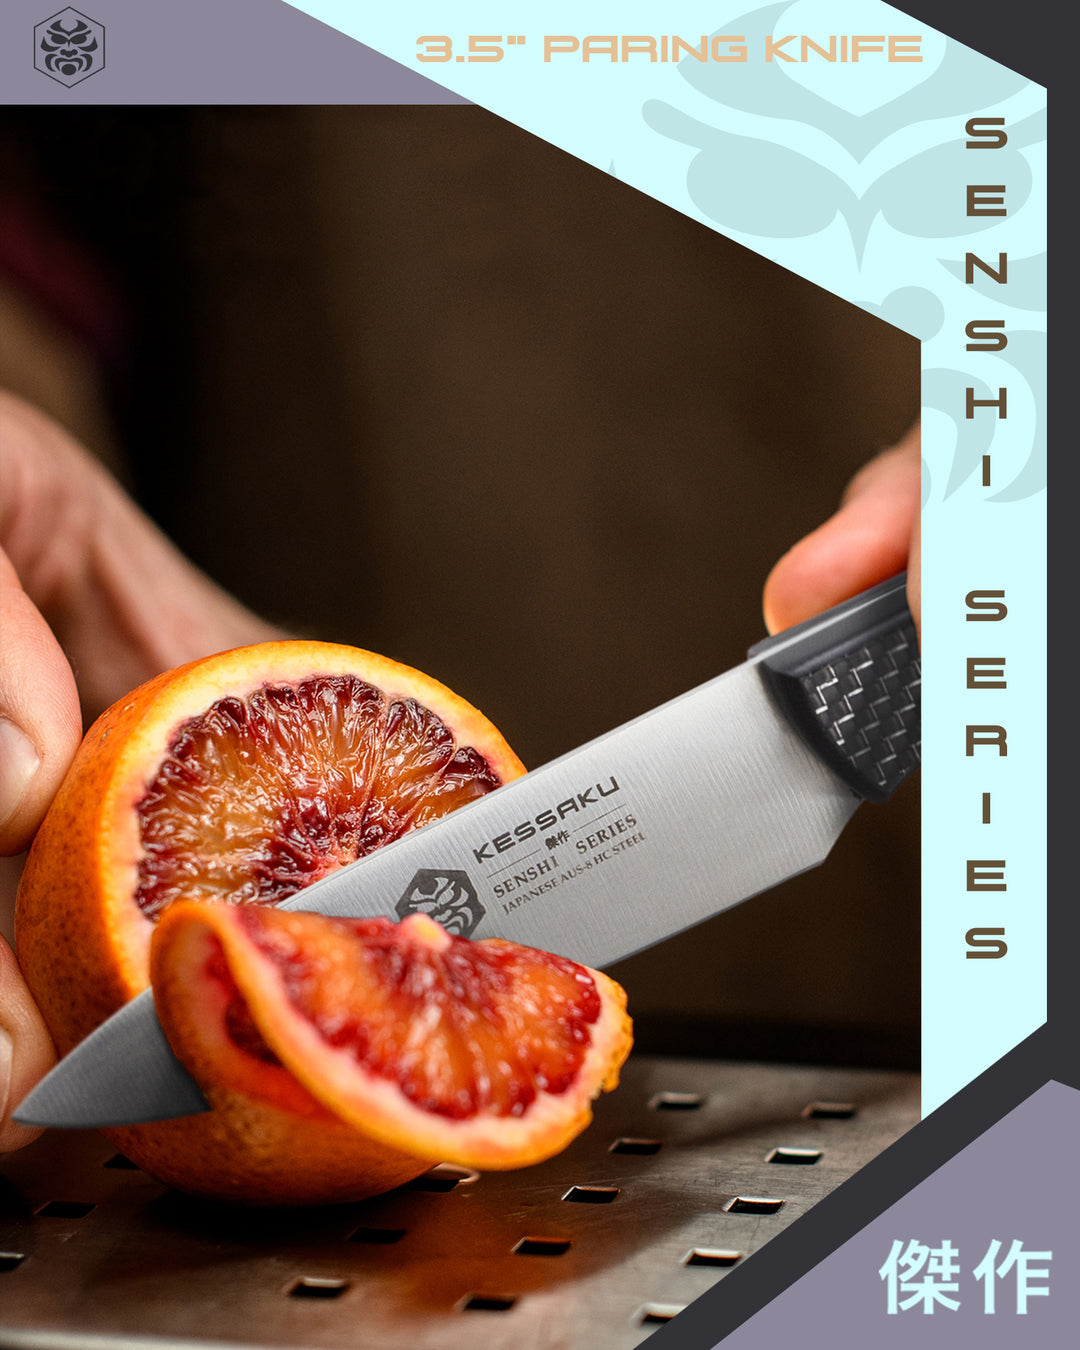 A chef slices a blood orange with the Senshi Series Paring Knife